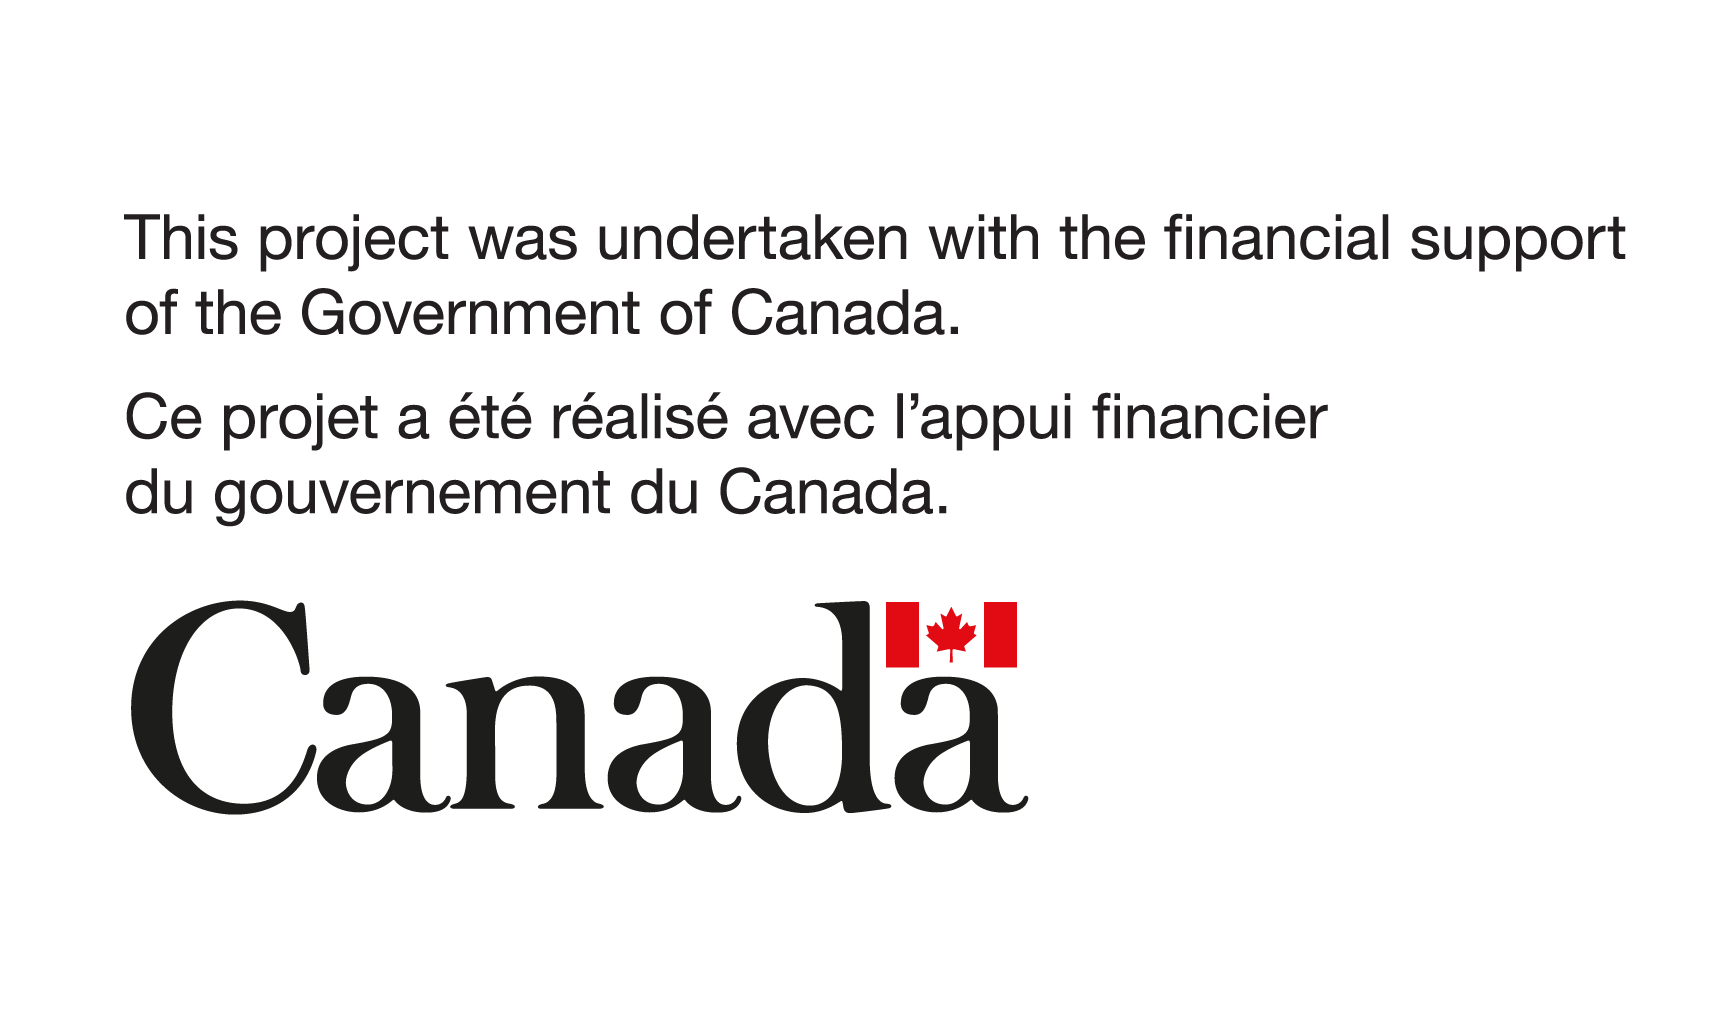 This project was undertaken with the financial support of the Government of Canada.